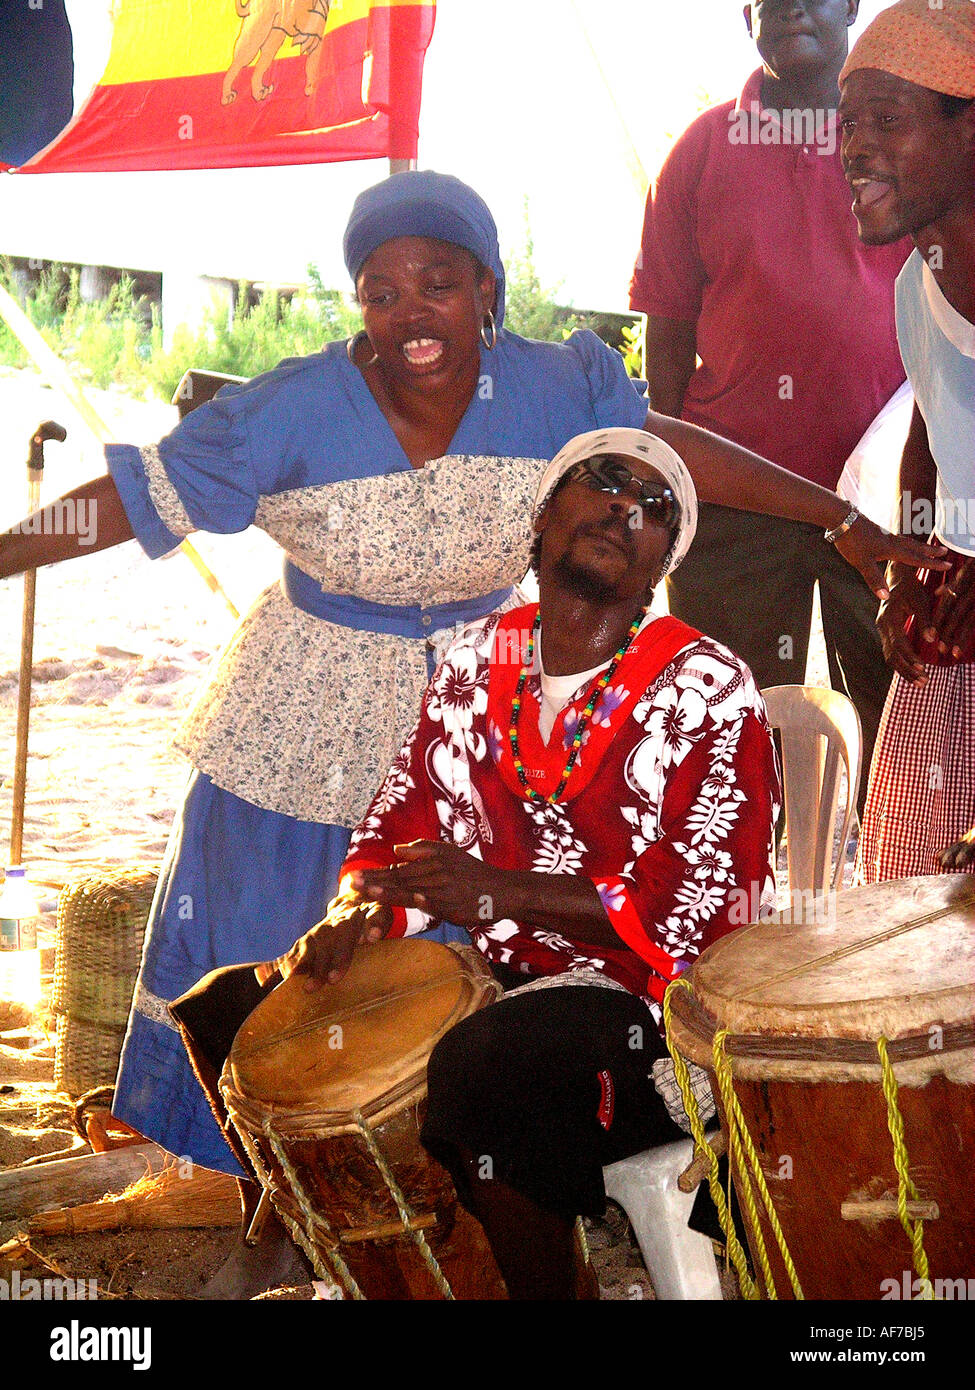 Belize. Street musicians playing drums with woman singing. Stock Photo